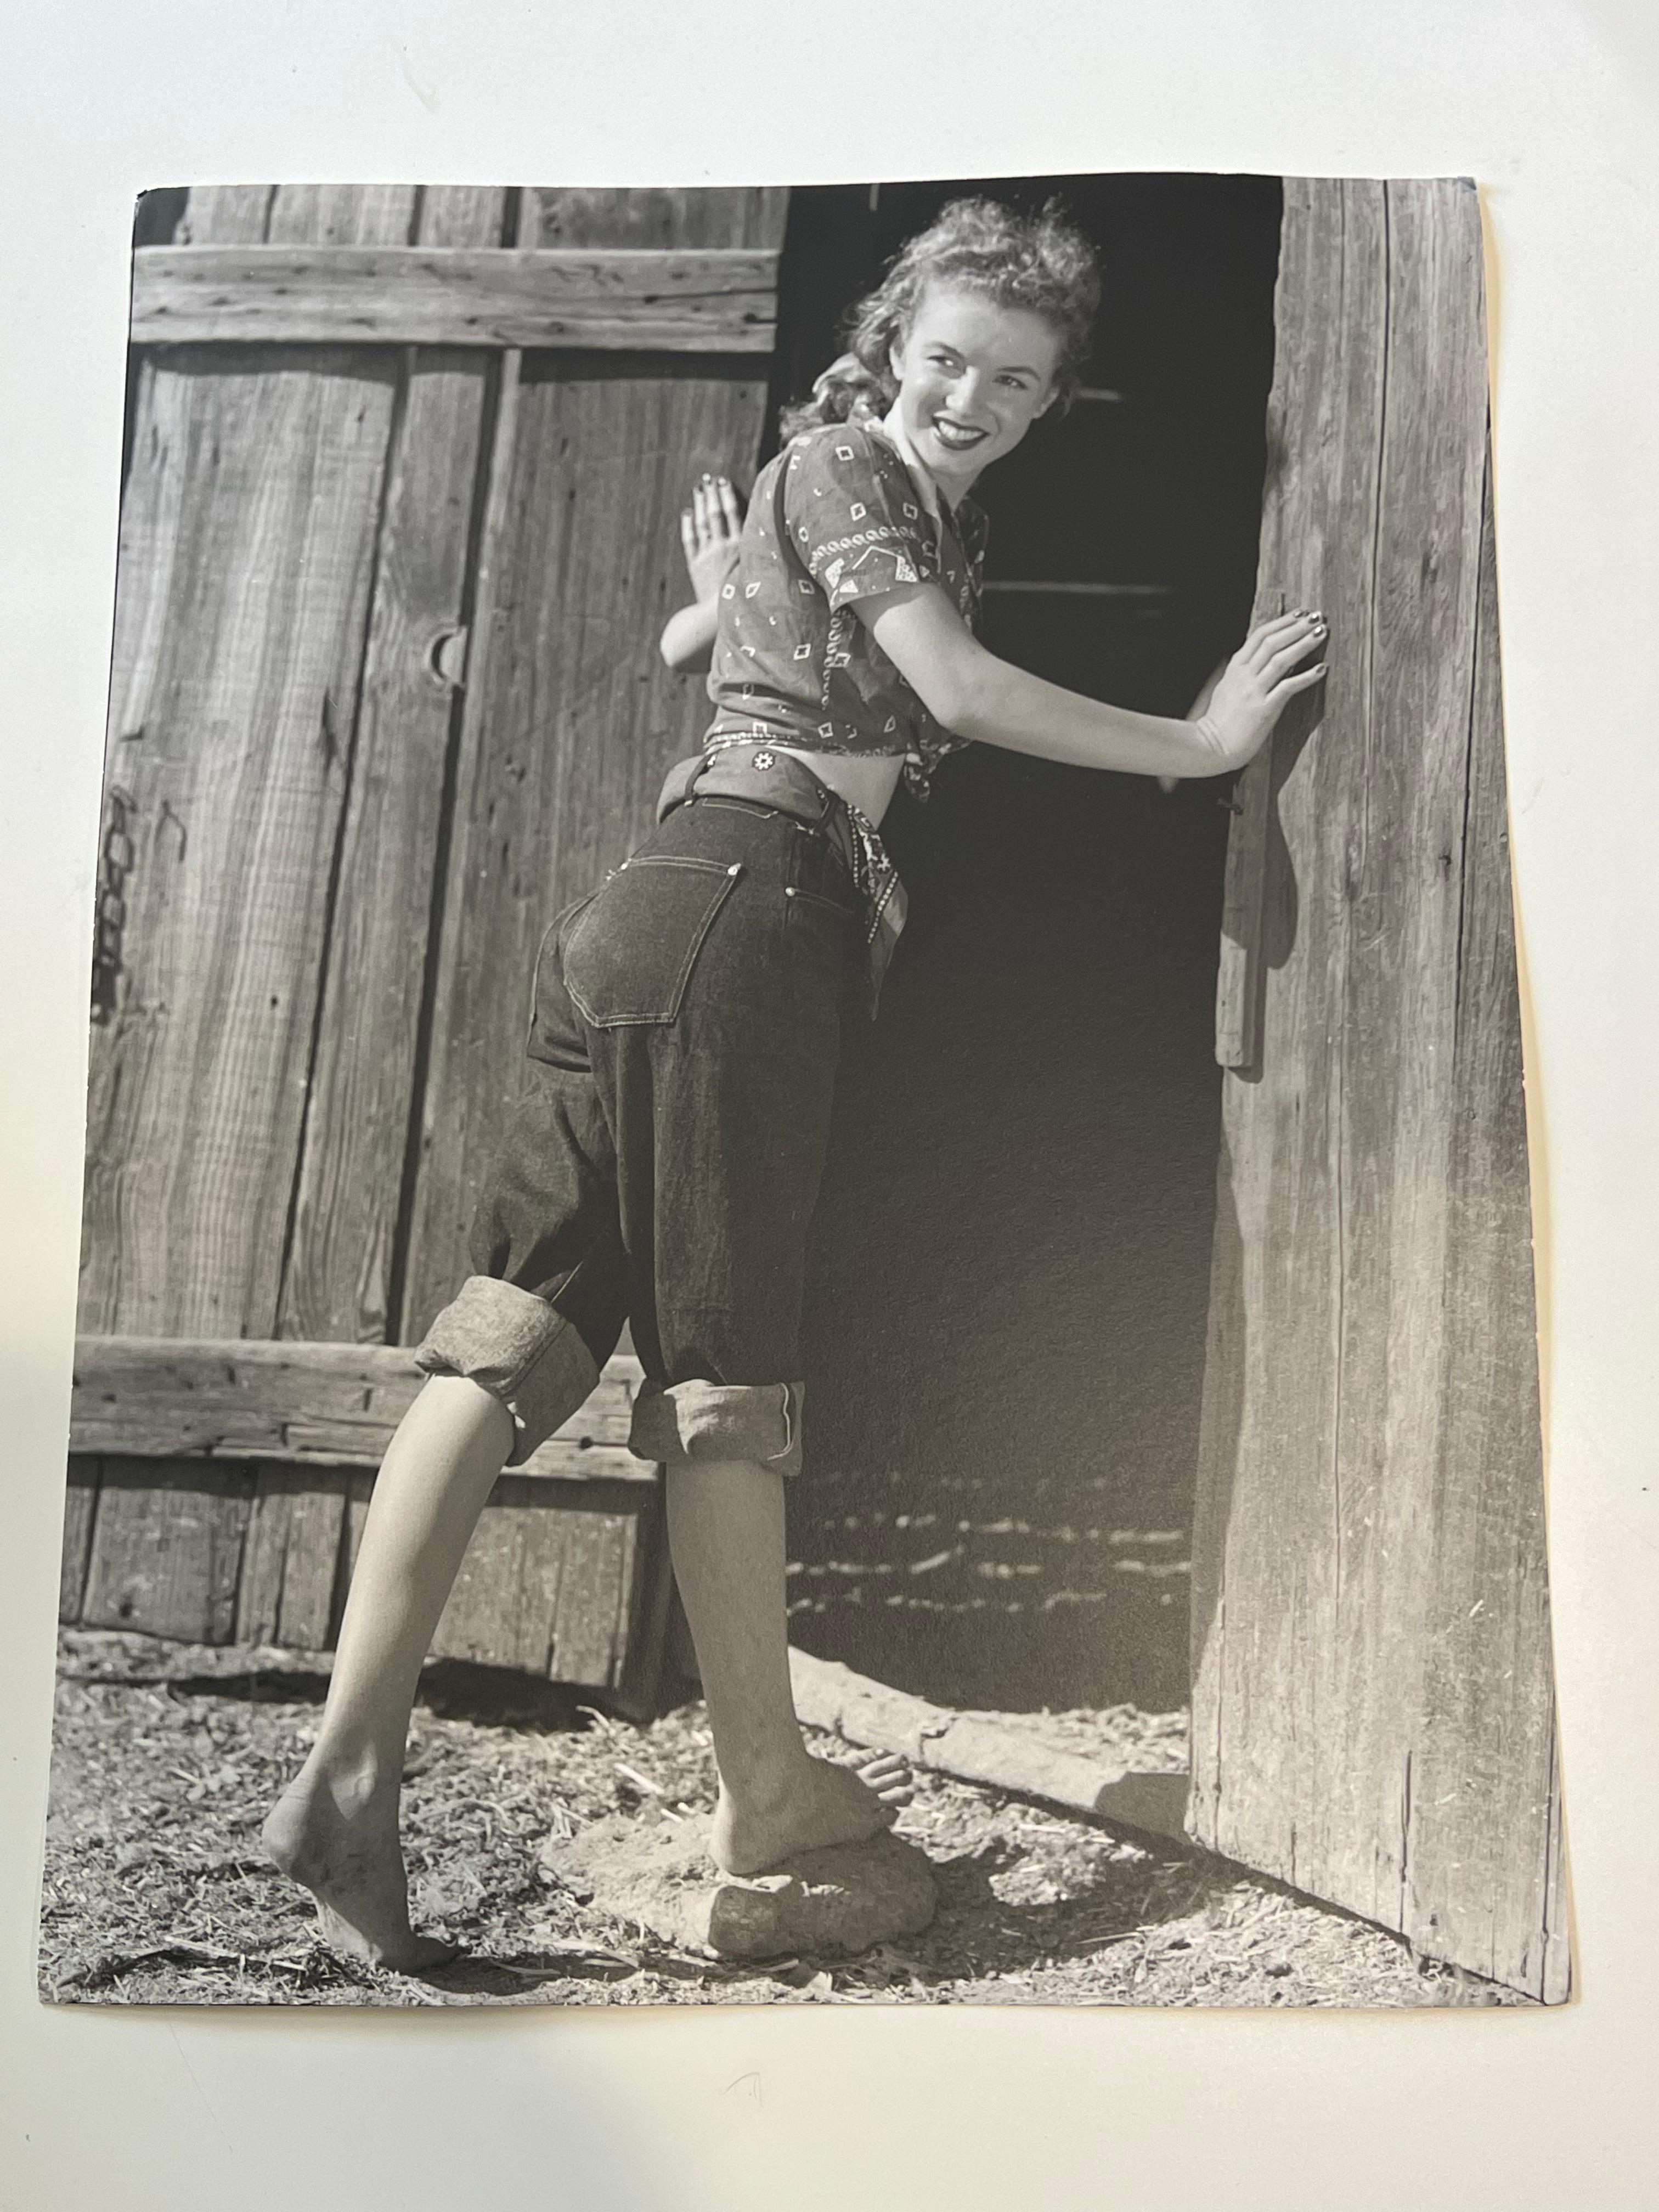 Rare Vintage Print of Marilyn Monroe From World Renowned Photographer Andre De Dienes. From the Famous Kim Goodwin Archives: Own a part of Hollywood History!